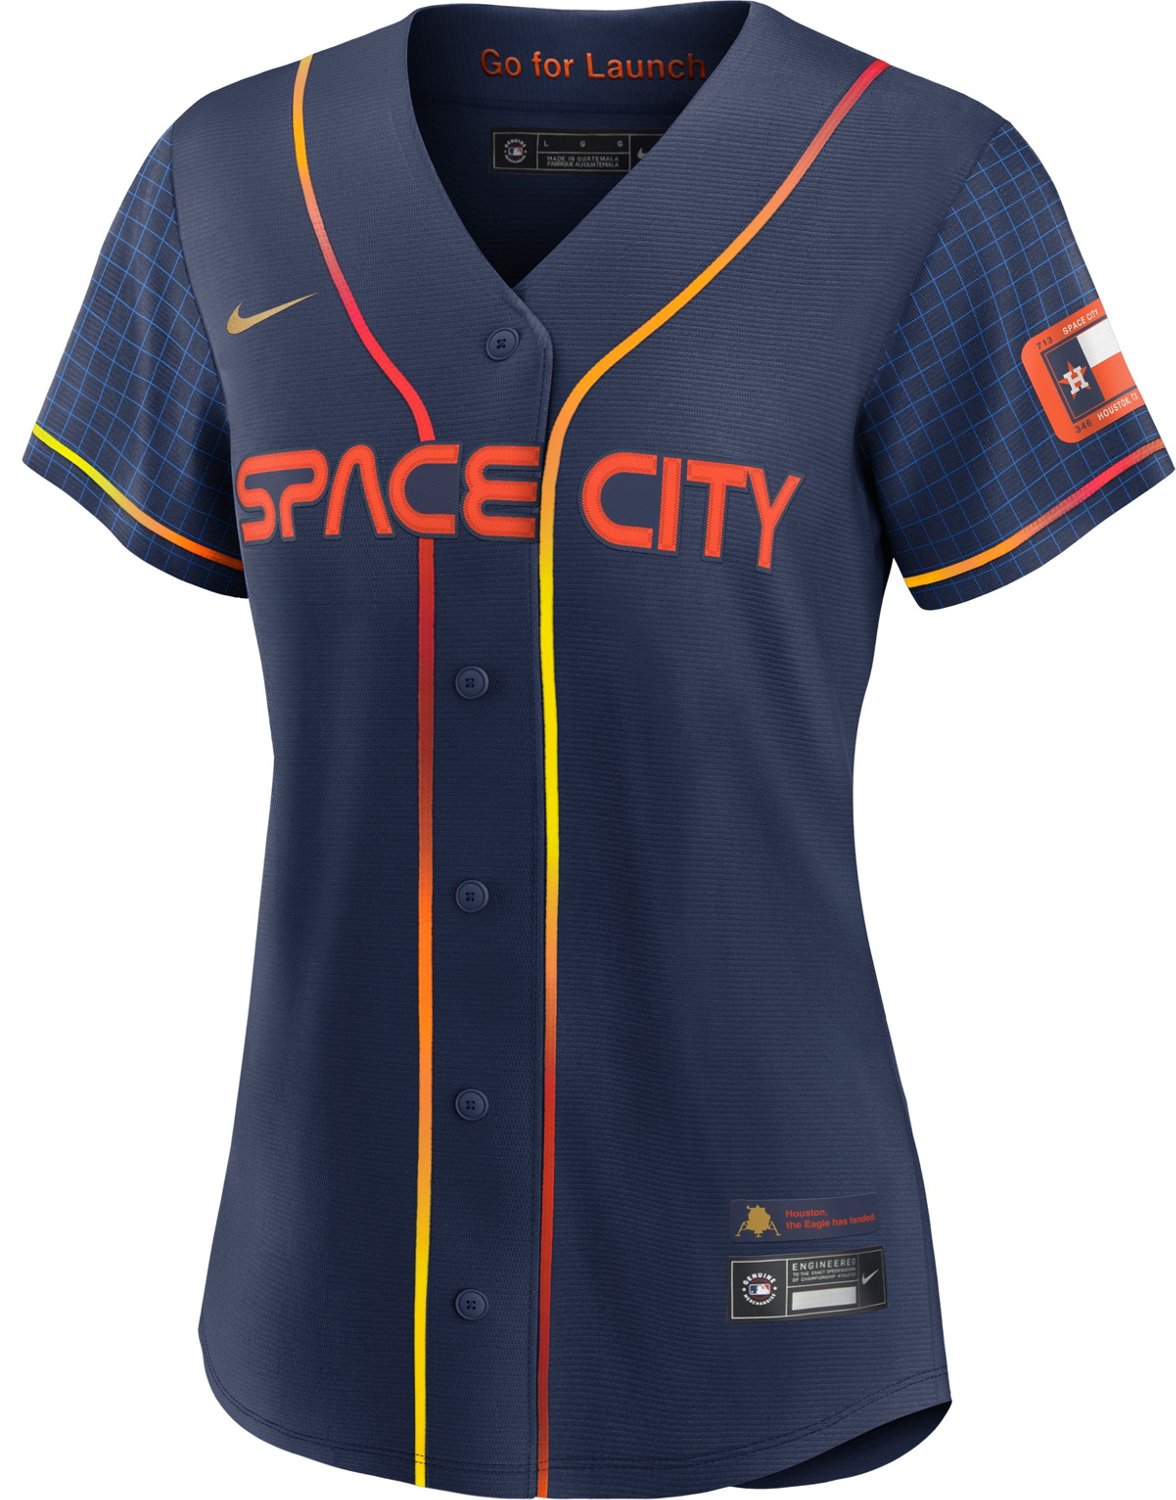 Lance Mccullers Autographed Signed Houston Astros Jersey Space City JSA COA